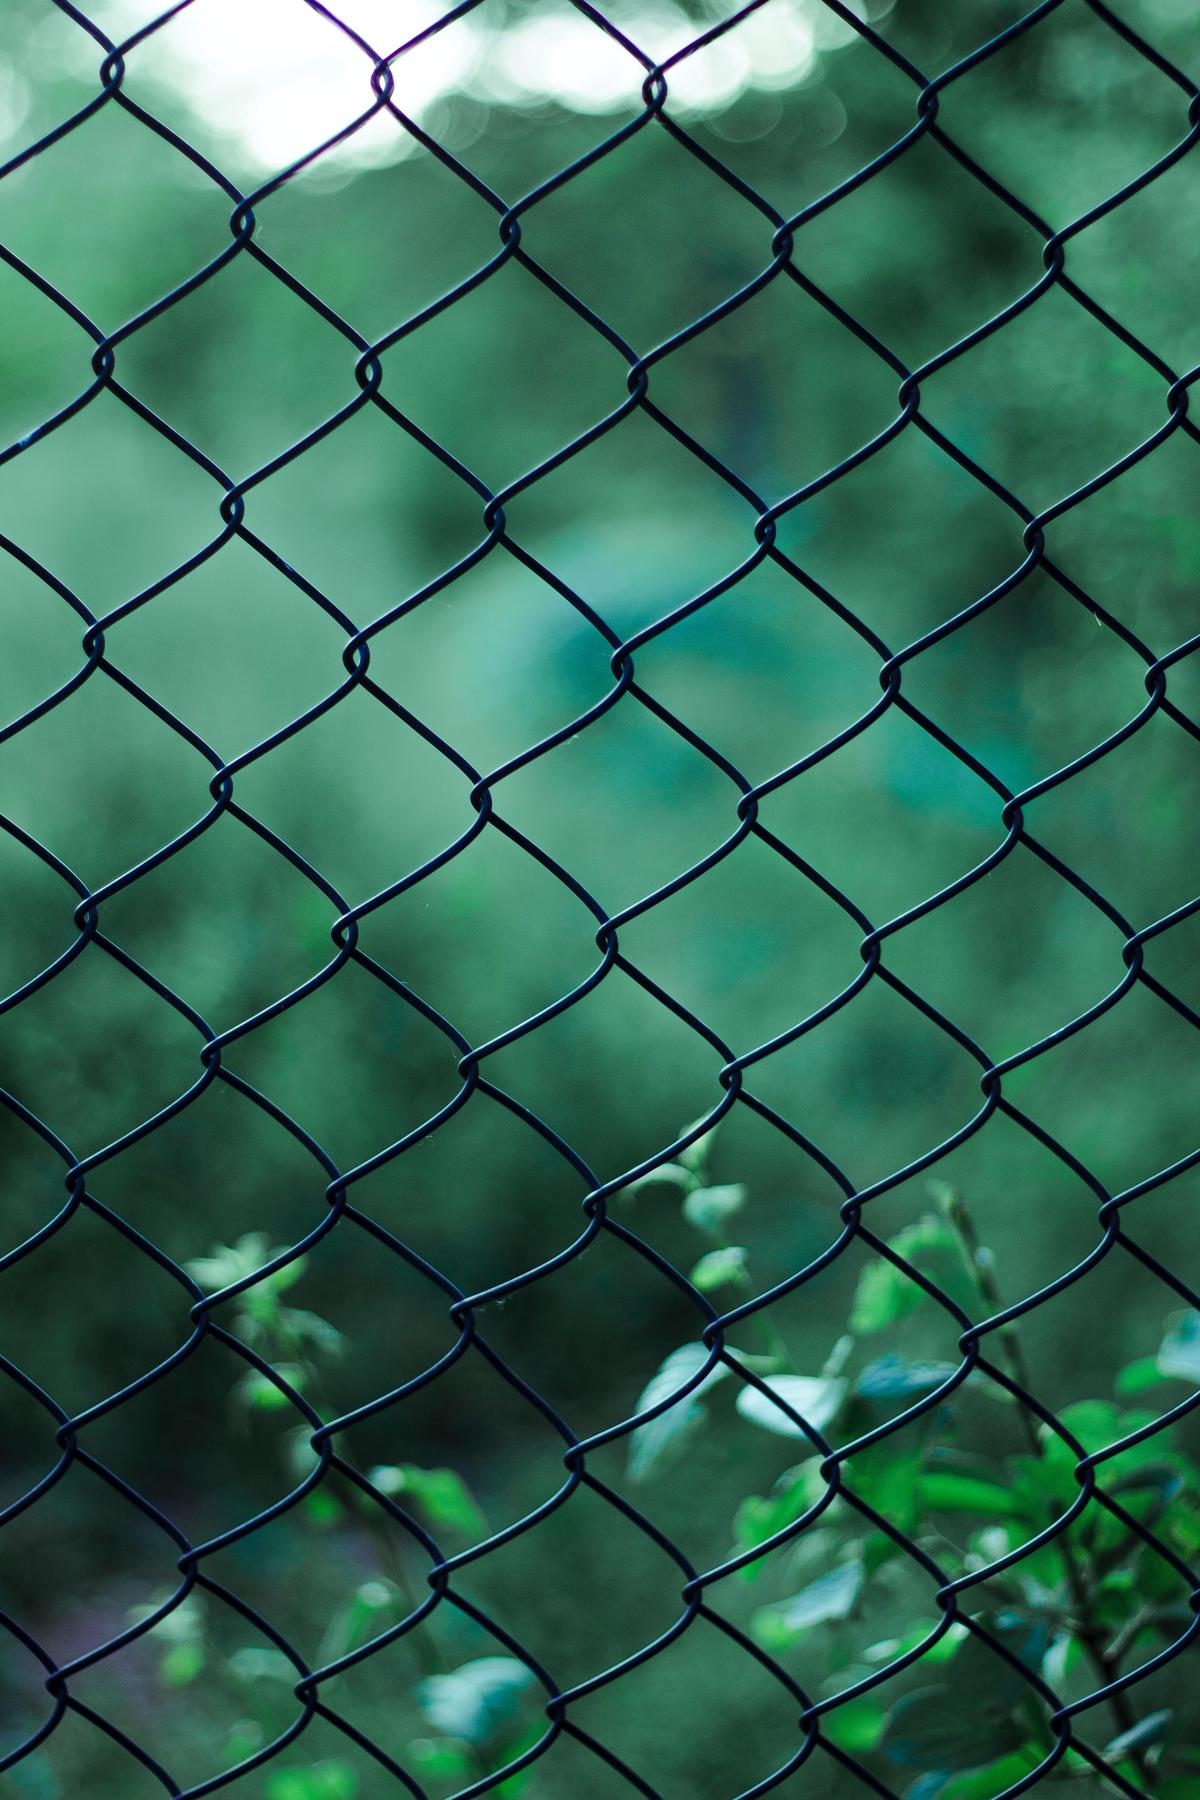 Image of various physical barriers for a dog in a garden, such as fences, garden screens, and plants with thorny textures